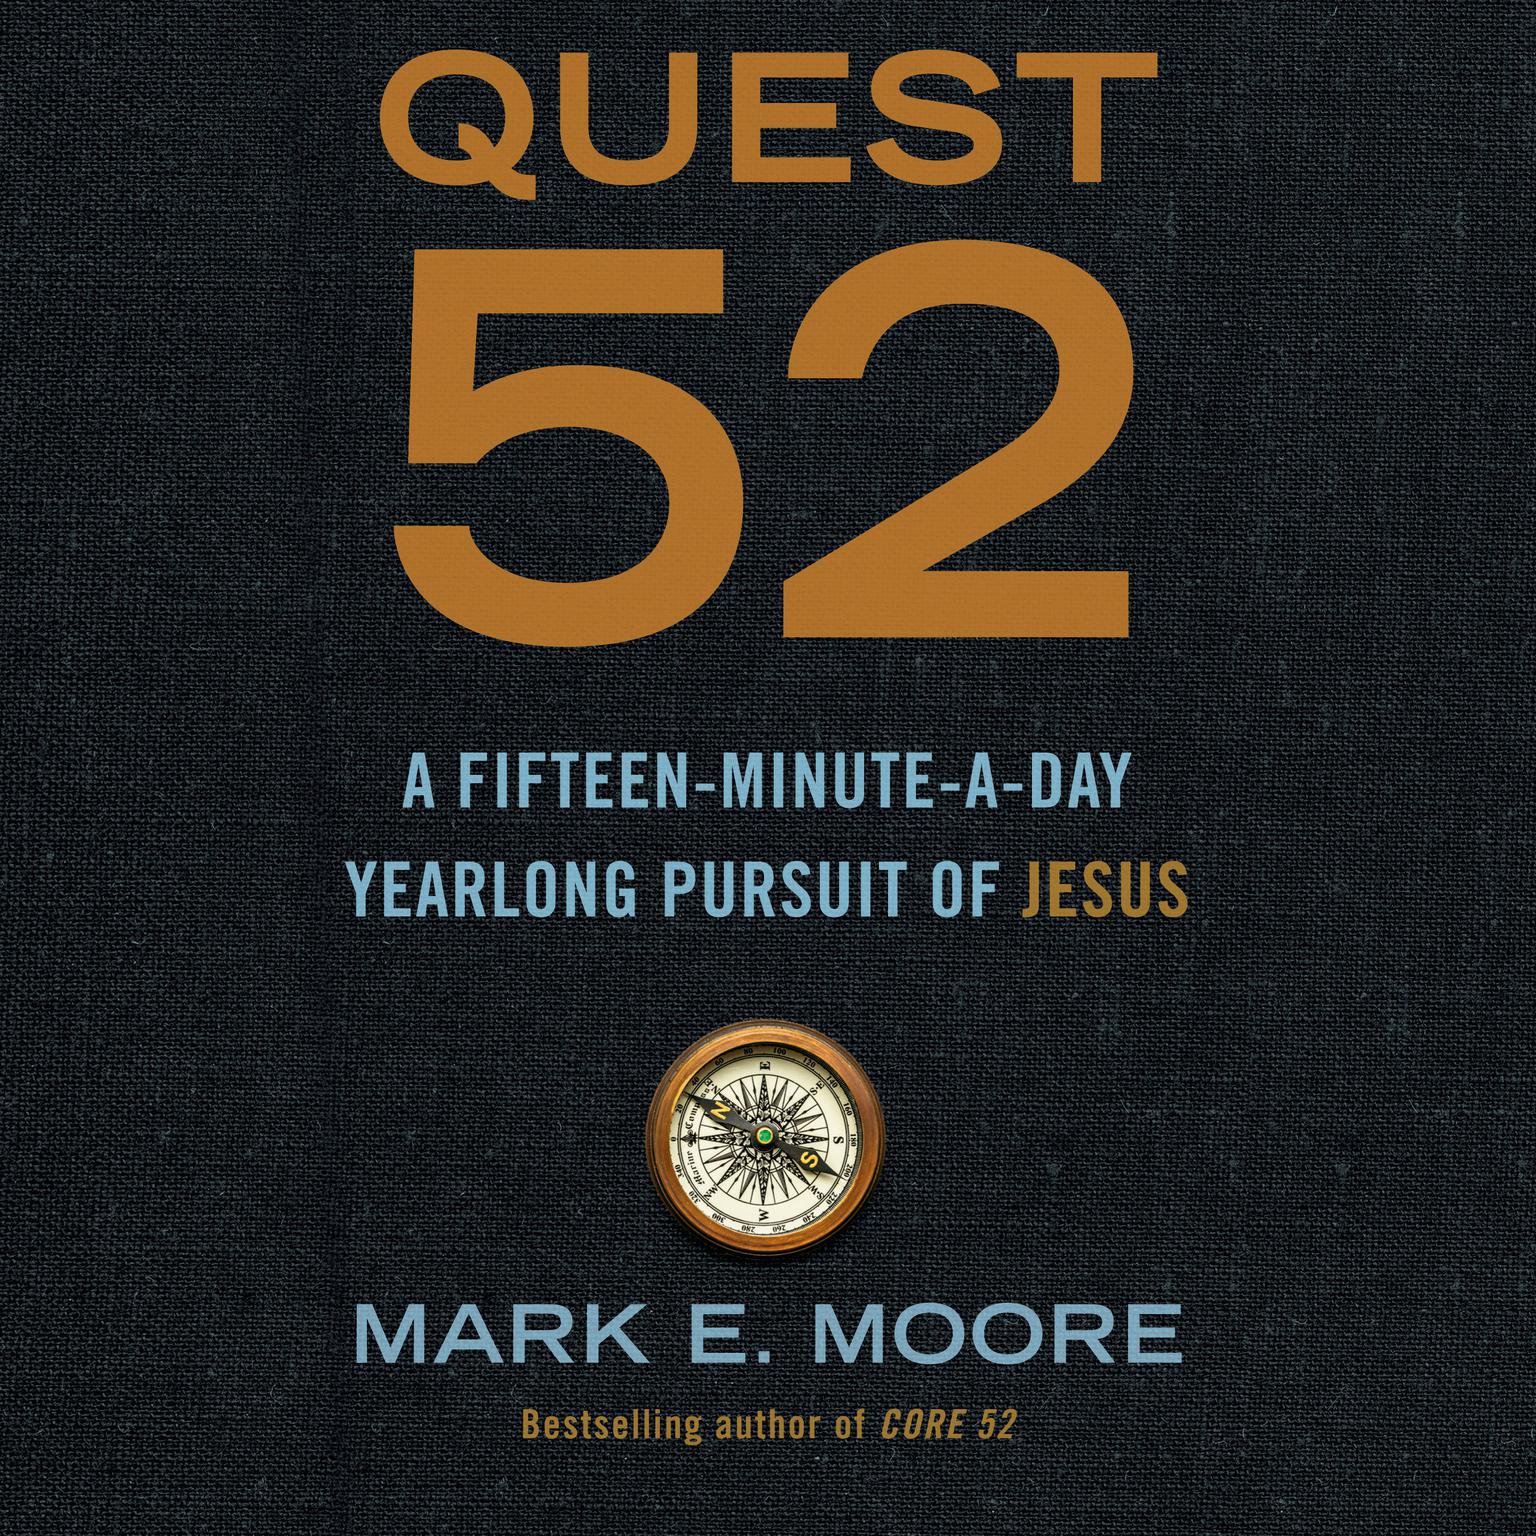 Quest 52: A Fifteen-Minute-a-Day Yearlong Pursuit of Jesus Audiobook, by Mark E. Moore